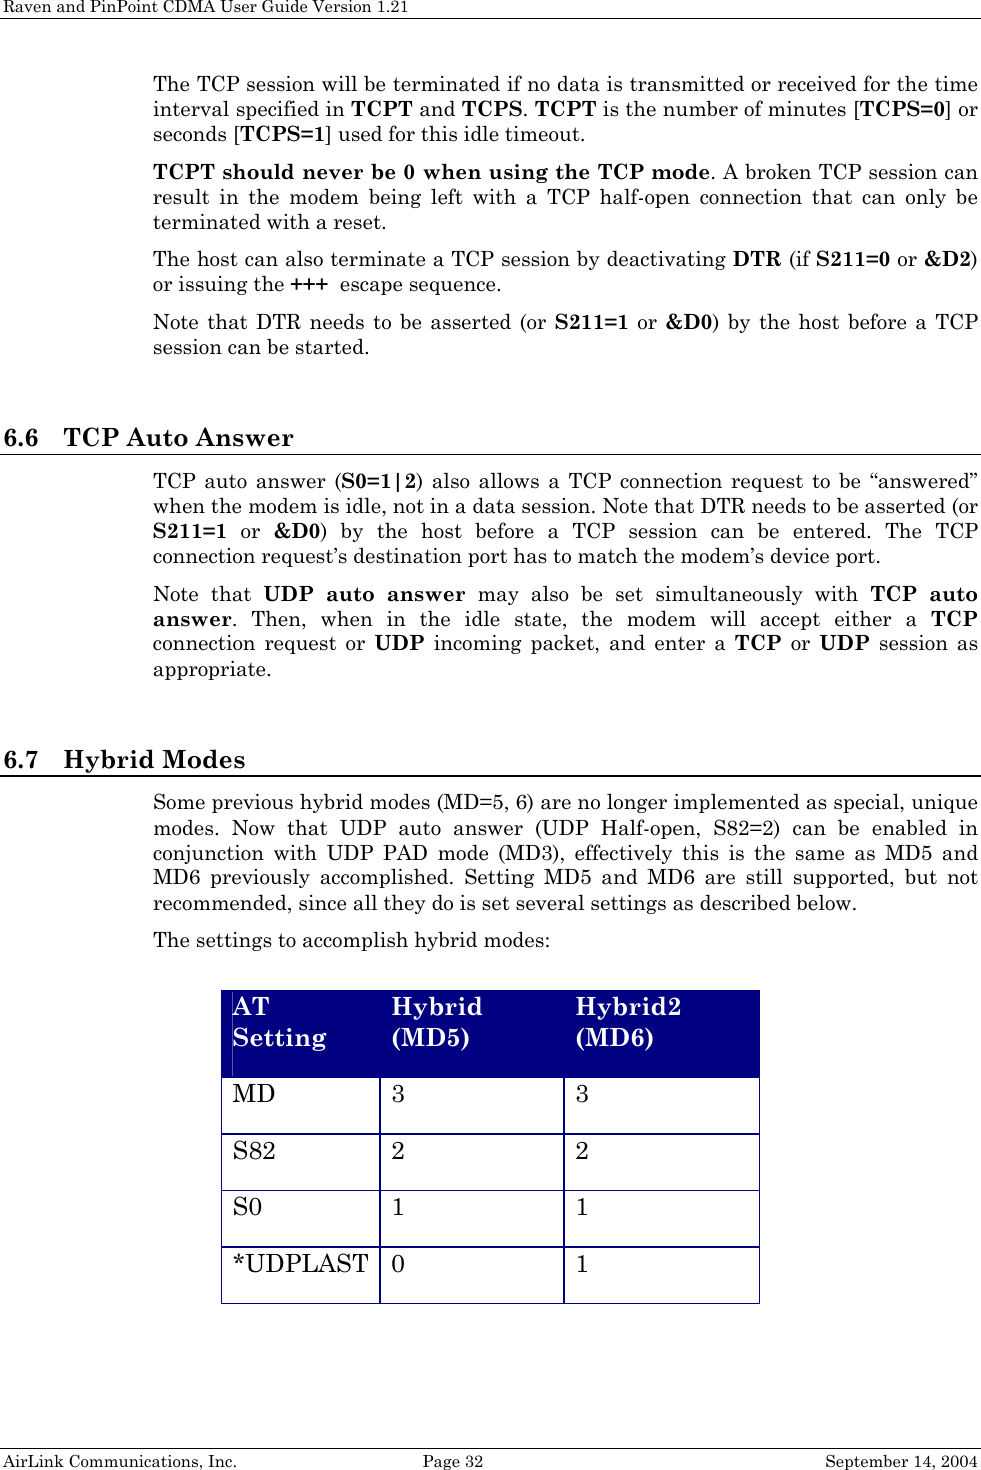 Raven and PinPoint CDMA User Guide Version 1.21 AirLink Communications, Inc.  Page 32  September 14, 2004 The TCP session will be terminated if no data is transmitted or received for the time interval specified in TCPT and TCPS. TCPT is the number of minutes [TCPS=0] or seconds [TCPS=1] used for this idle timeout.  TCPT should never be 0 when using the TCP mode. A broken TCP session can result in the modem being left with a TCP half-open connection that can only be terminated with a reset. The host can also terminate a TCP session by deactivating DTR (if S211=0 or &amp;D2) or issuing the +++  escape sequence. Note that DTR needs to be asserted (or S211=1 or &amp;D0) by the host before a TCP session can be started.  6.6 TCP Auto Answer TCP auto answer (S0=1|2) also allows a TCP connection request to be “answered” when the modem is idle, not in a data session. Note that DTR needs to be asserted (or S211=1 or &amp;D0) by the host before a TCP session can be entered. The TCP connection request’s destination port has to match the modem’s device port. Note that UDP auto answer may also be set simultaneously with TCP auto answer. Then, when in the idle state, the modem will accept either a TCP connection request or UDP incoming packet, and enter a TCP or UDP session as appropriate.  6.7 Hybrid Modes Some previous hybrid modes (MD=5, 6) are no longer implemented as special, unique modes. Now that UDP auto answer (UDP Half-open, S82=2) can be enabled in conjunction with UDP PAD mode (MD3), effectively this is the same as MD5 and MD6 previously accomplished. Setting MD5 and MD6 are still supported, but not recommended, since all they do is set several settings as described below. The settings to accomplish hybrid modes:  AT Setting Hybrid (MD5) Hybrid2 (MD6) MD 3 3 S82 2 2 S0 1 1 *UDPLAST 0 1  